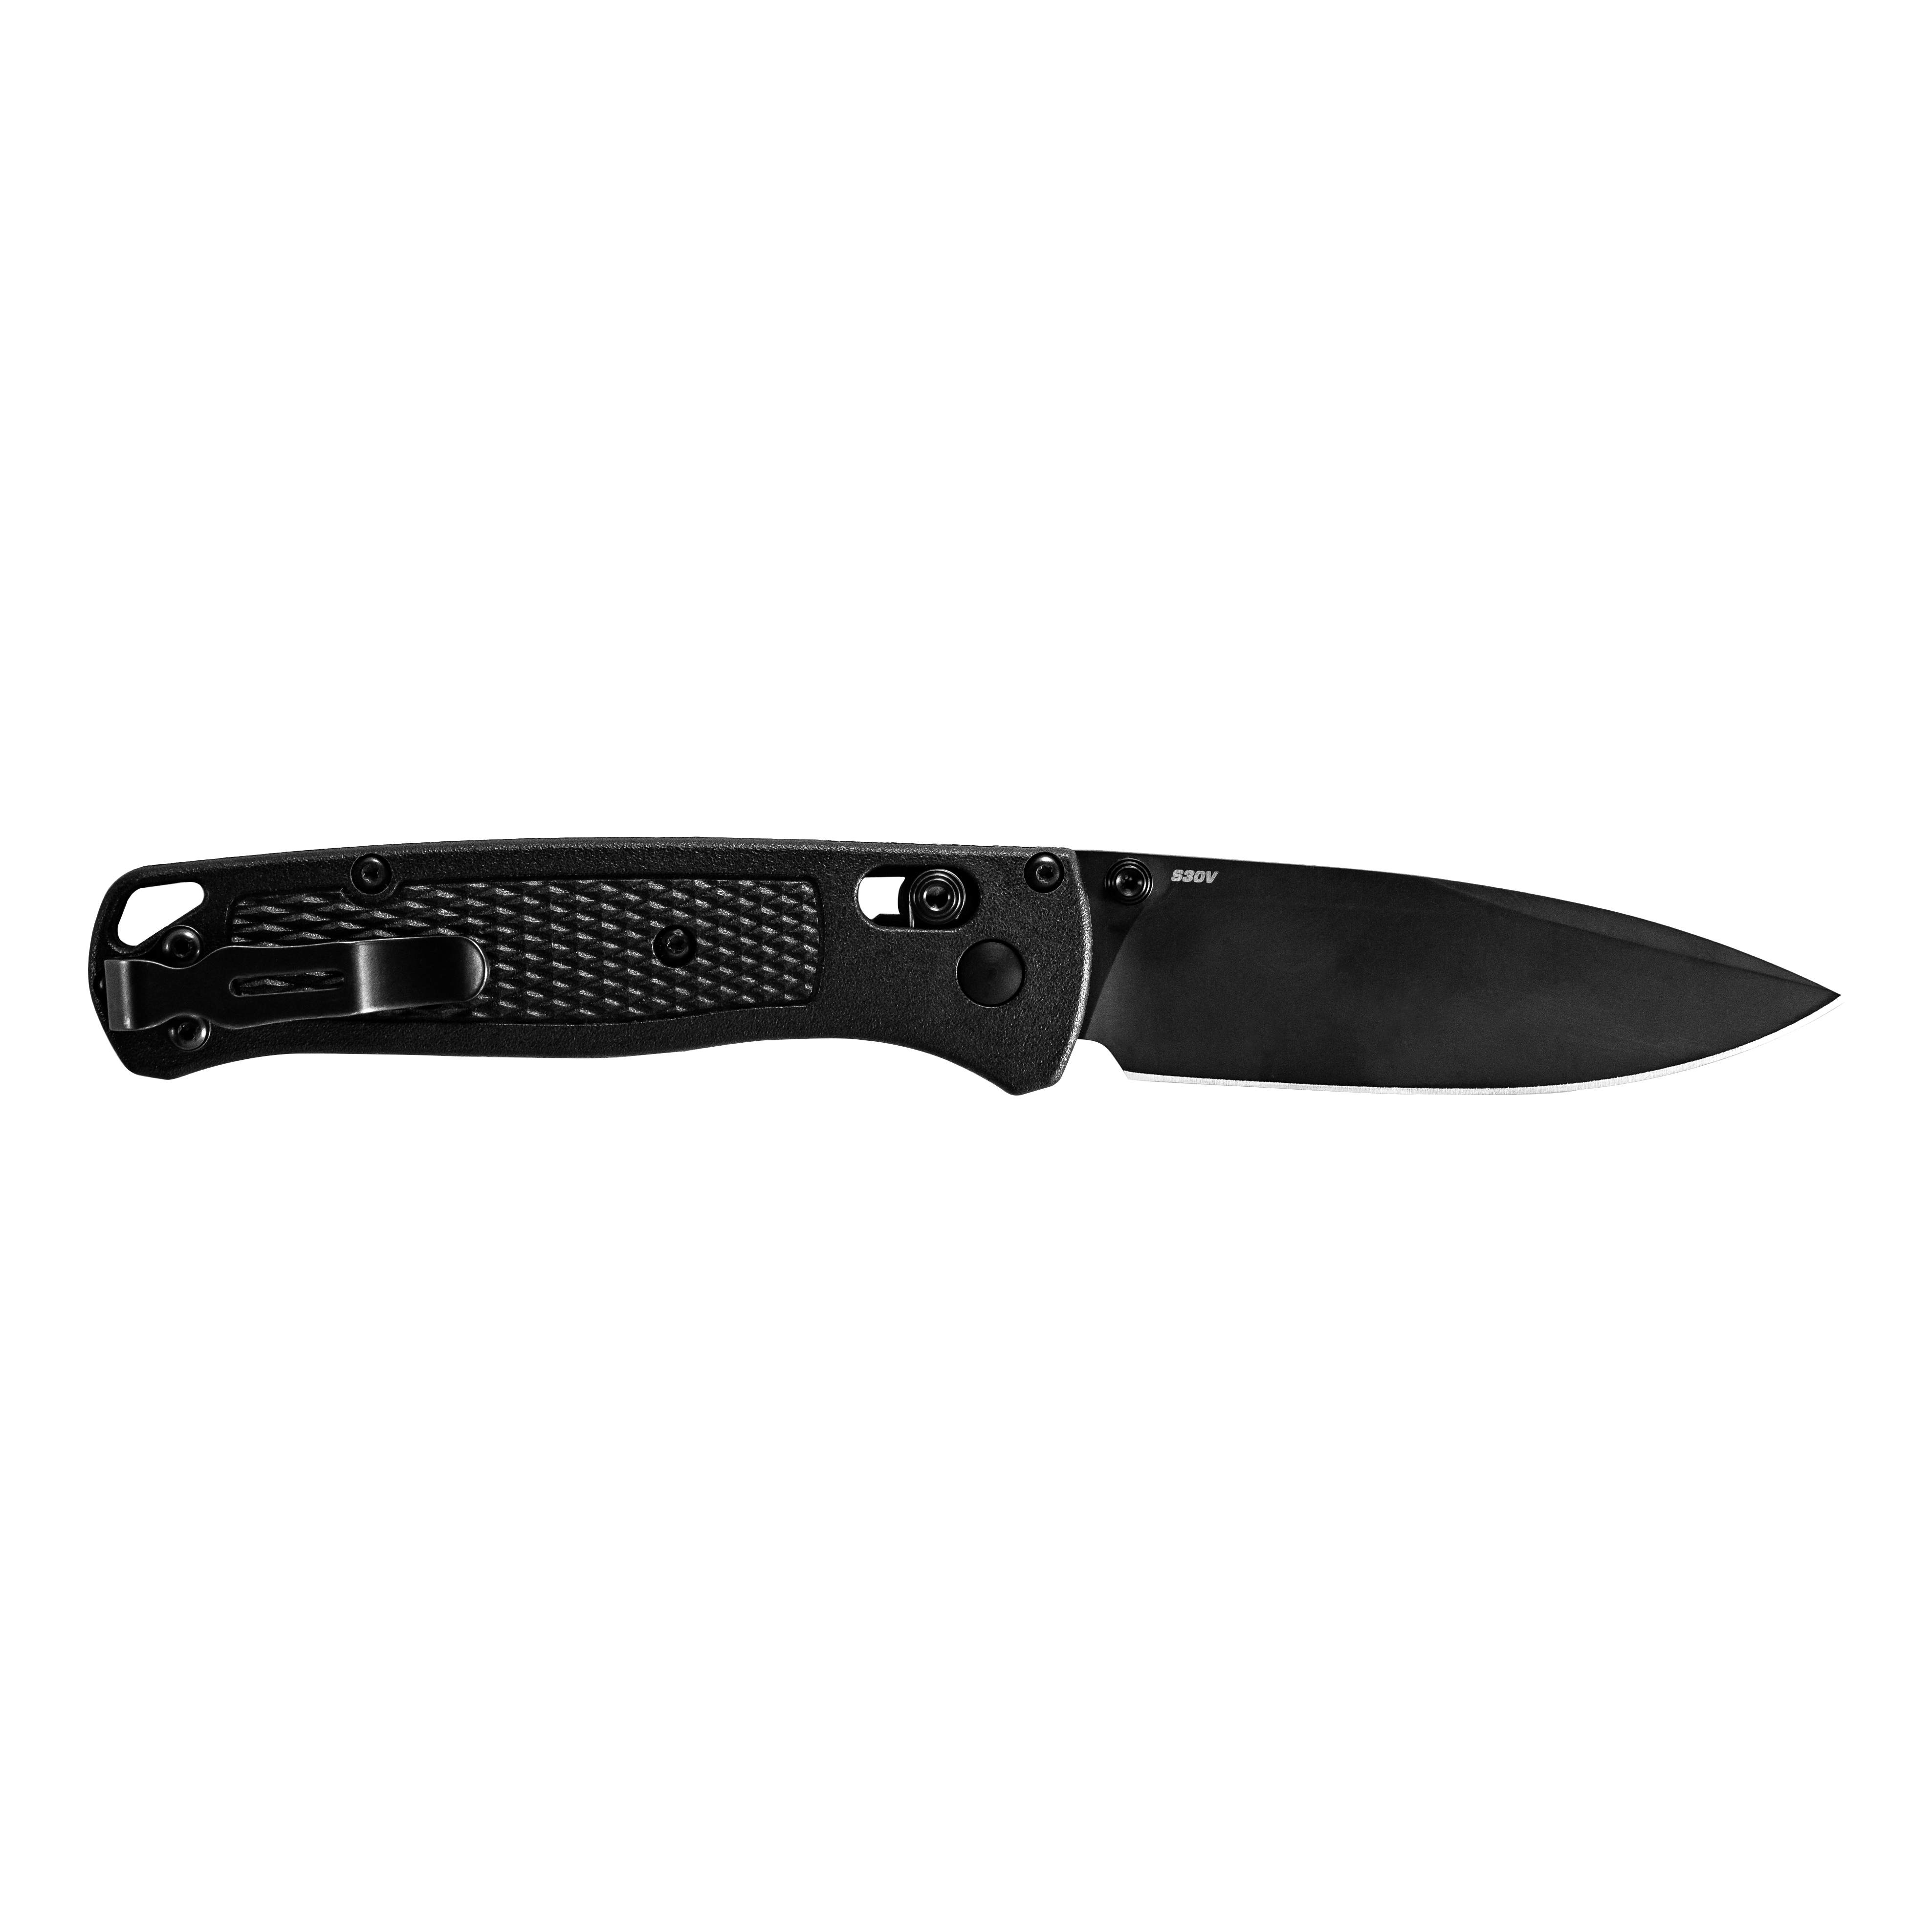 Benchmade® 535 Bugout Folding Knife - Opposite Side View